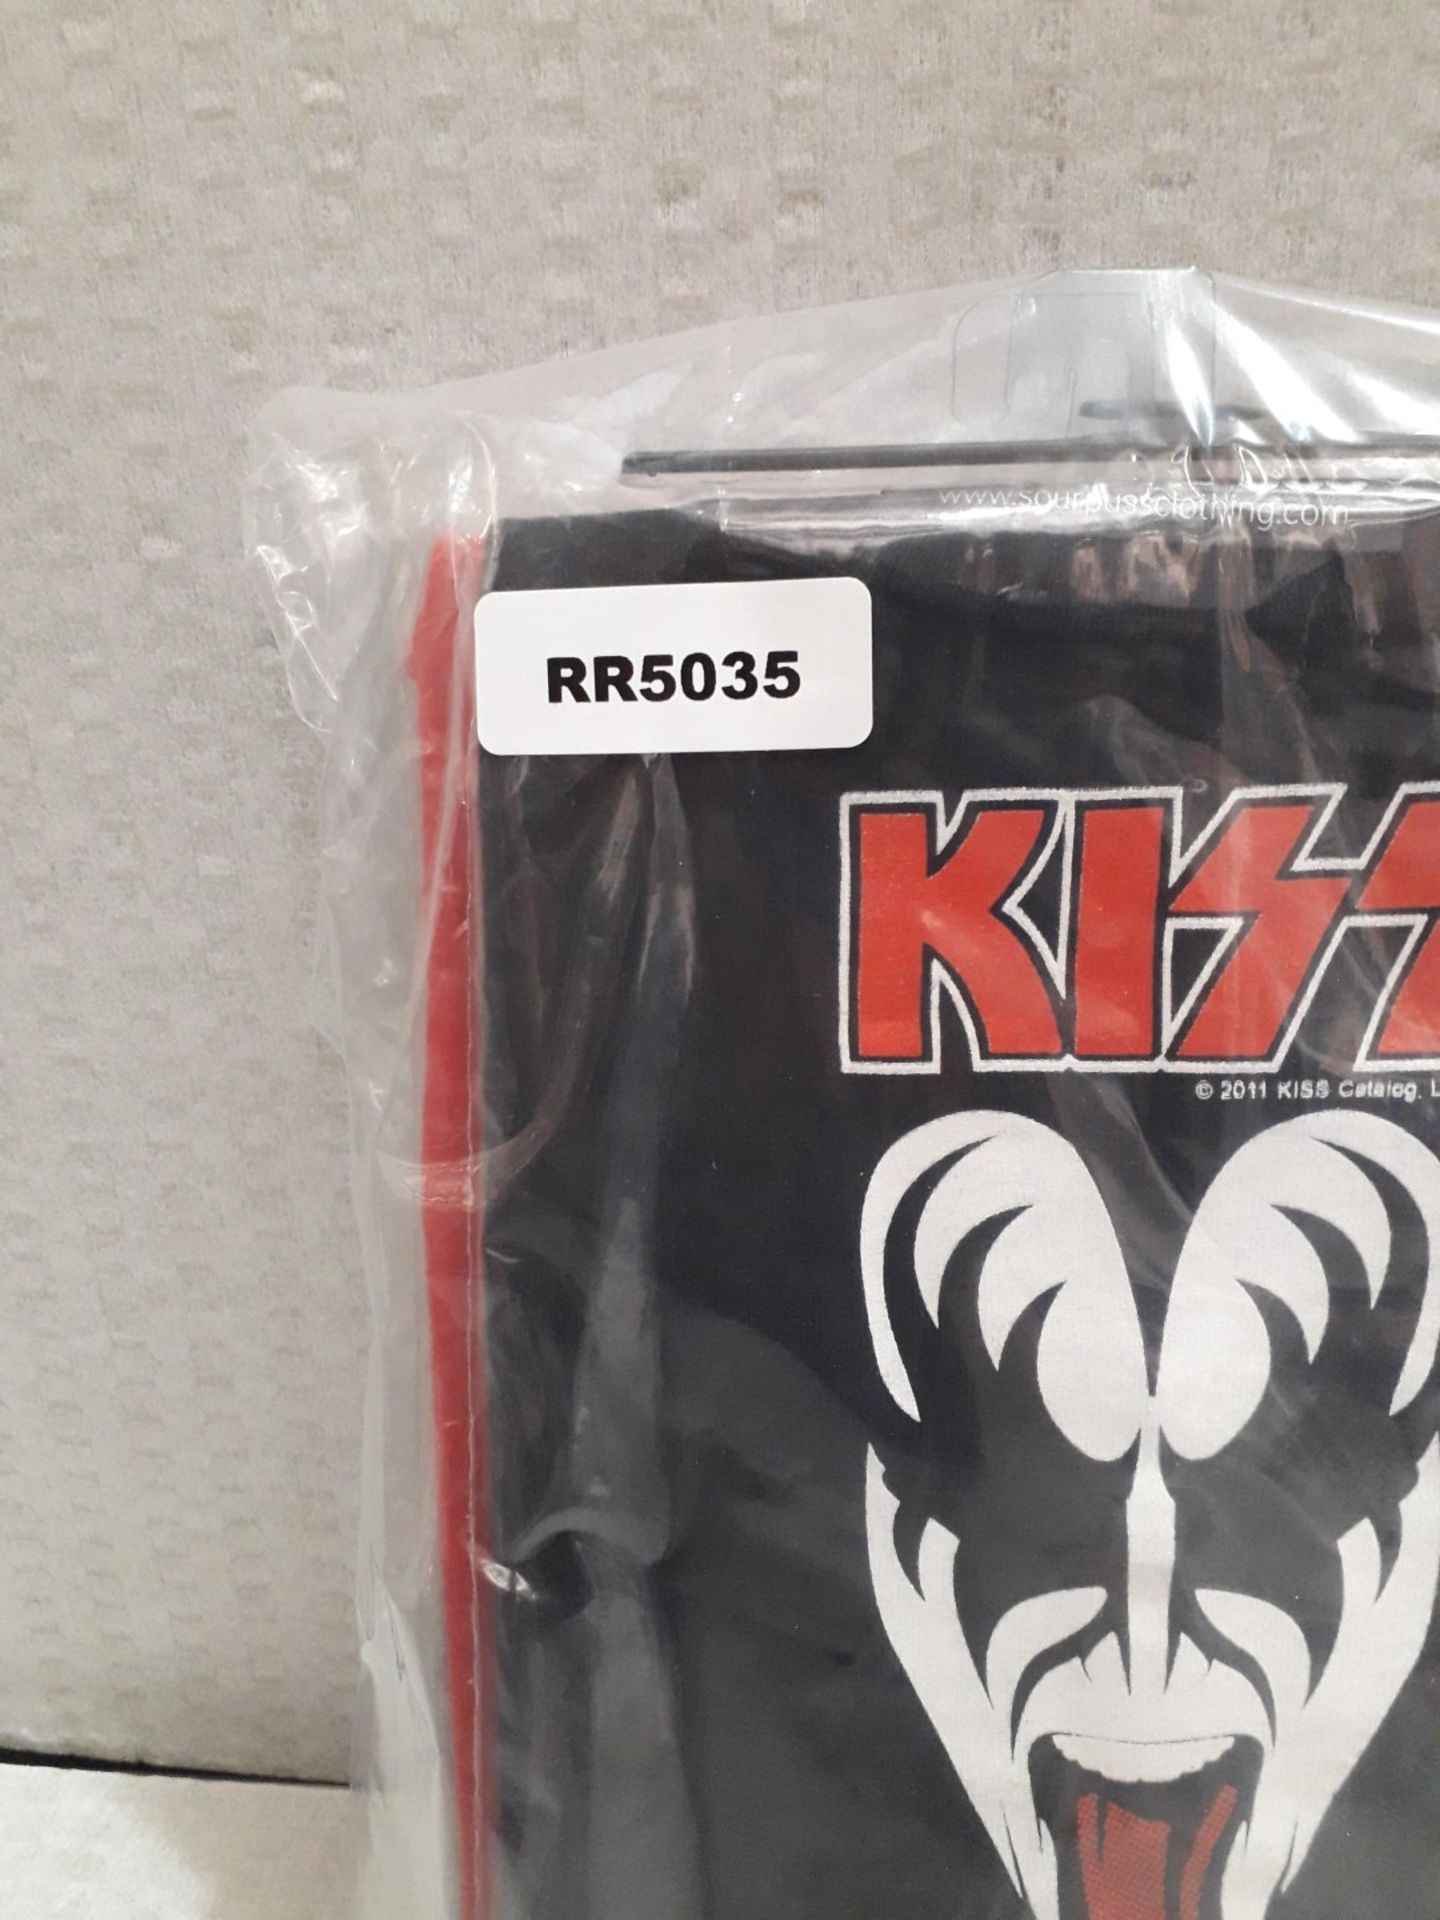 3 x Rock and Roll Themed KISS, Ramones and AC/DC Short Sleeve Baby T-Shirts - Size: 6 Months - - Image 3 of 10